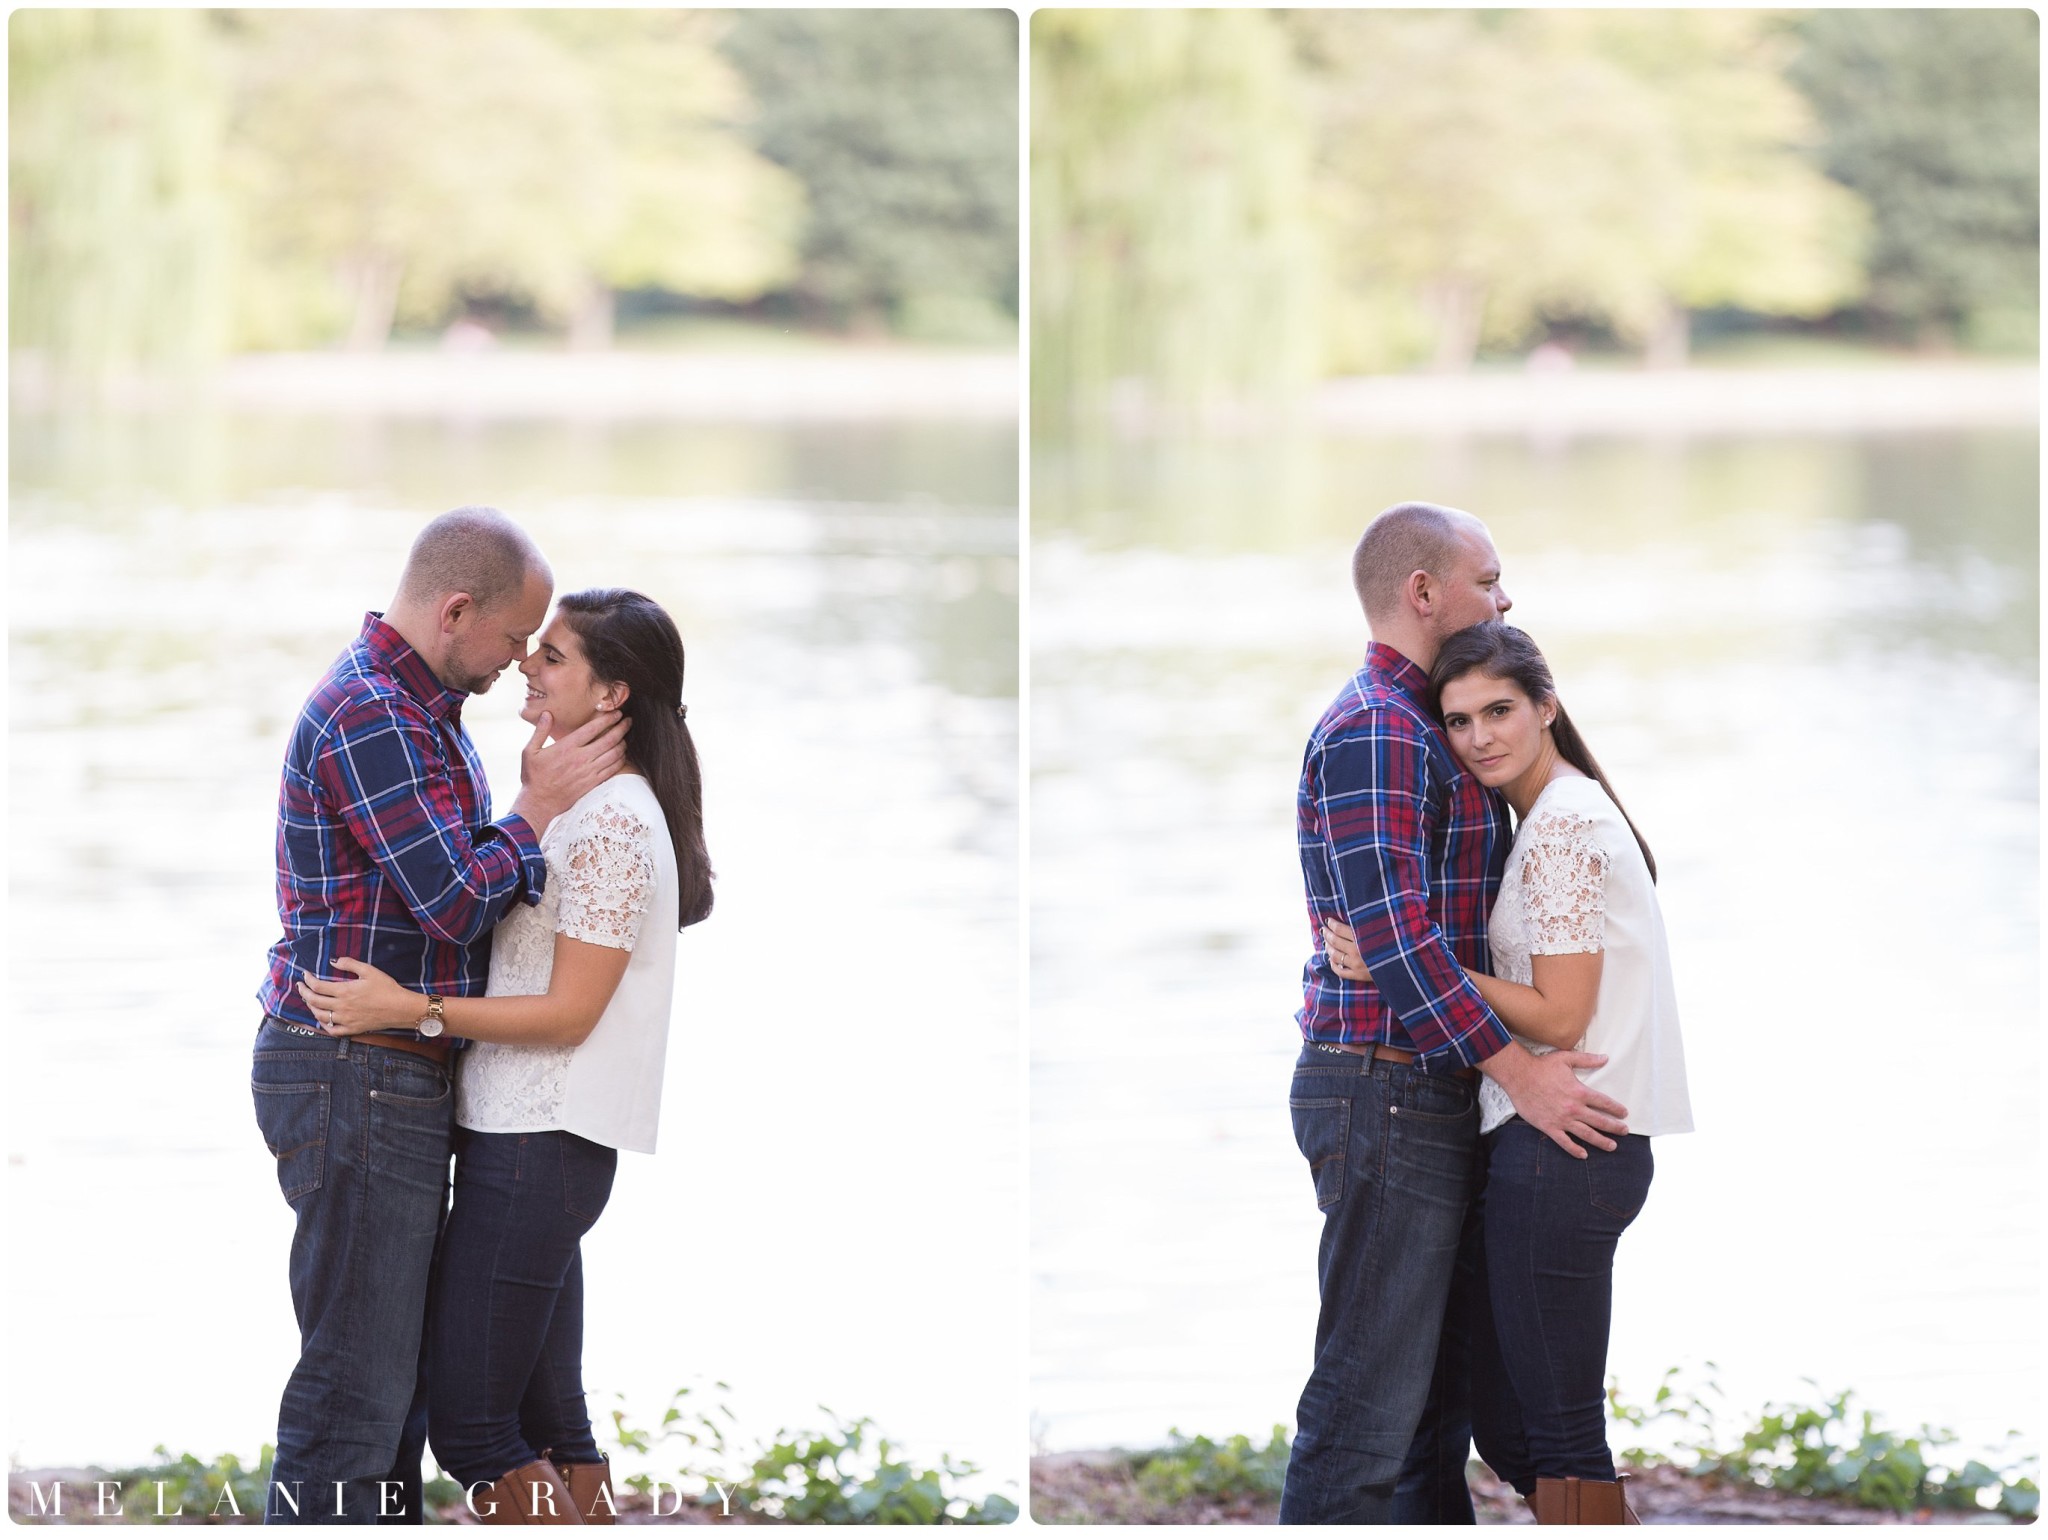 Melanie Grady wedding photography - Nashville engagement photography, Centennial Park, Pedestrian bridge, award winning Nashville wedding photographer, the best photographer in nashville, weeping willow and a pond at the engagement session